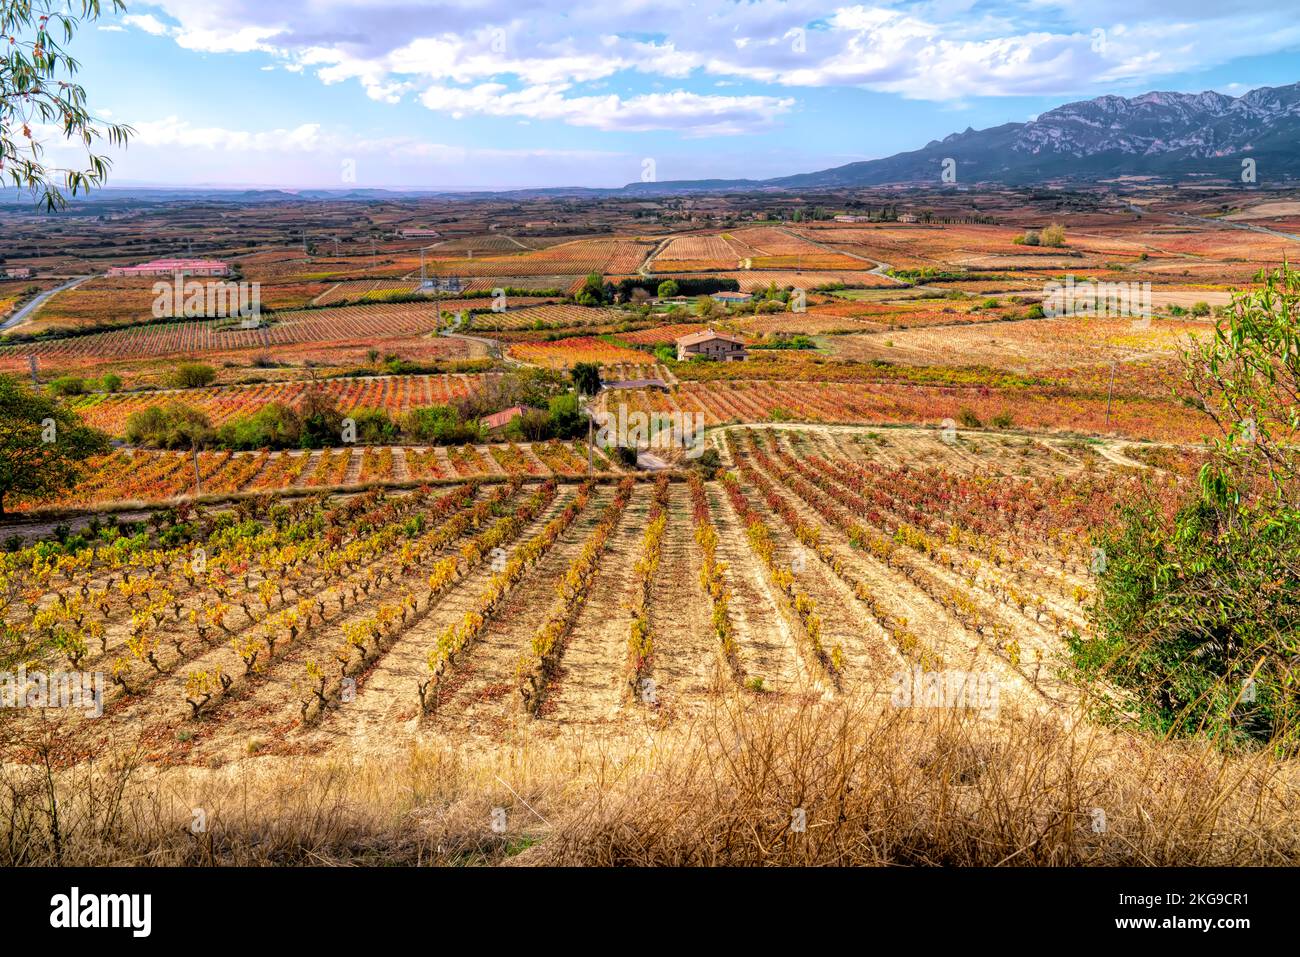 Vineyard and vines Rioja wine region view from Laguardia Spain of countryside and fields Stock Photo